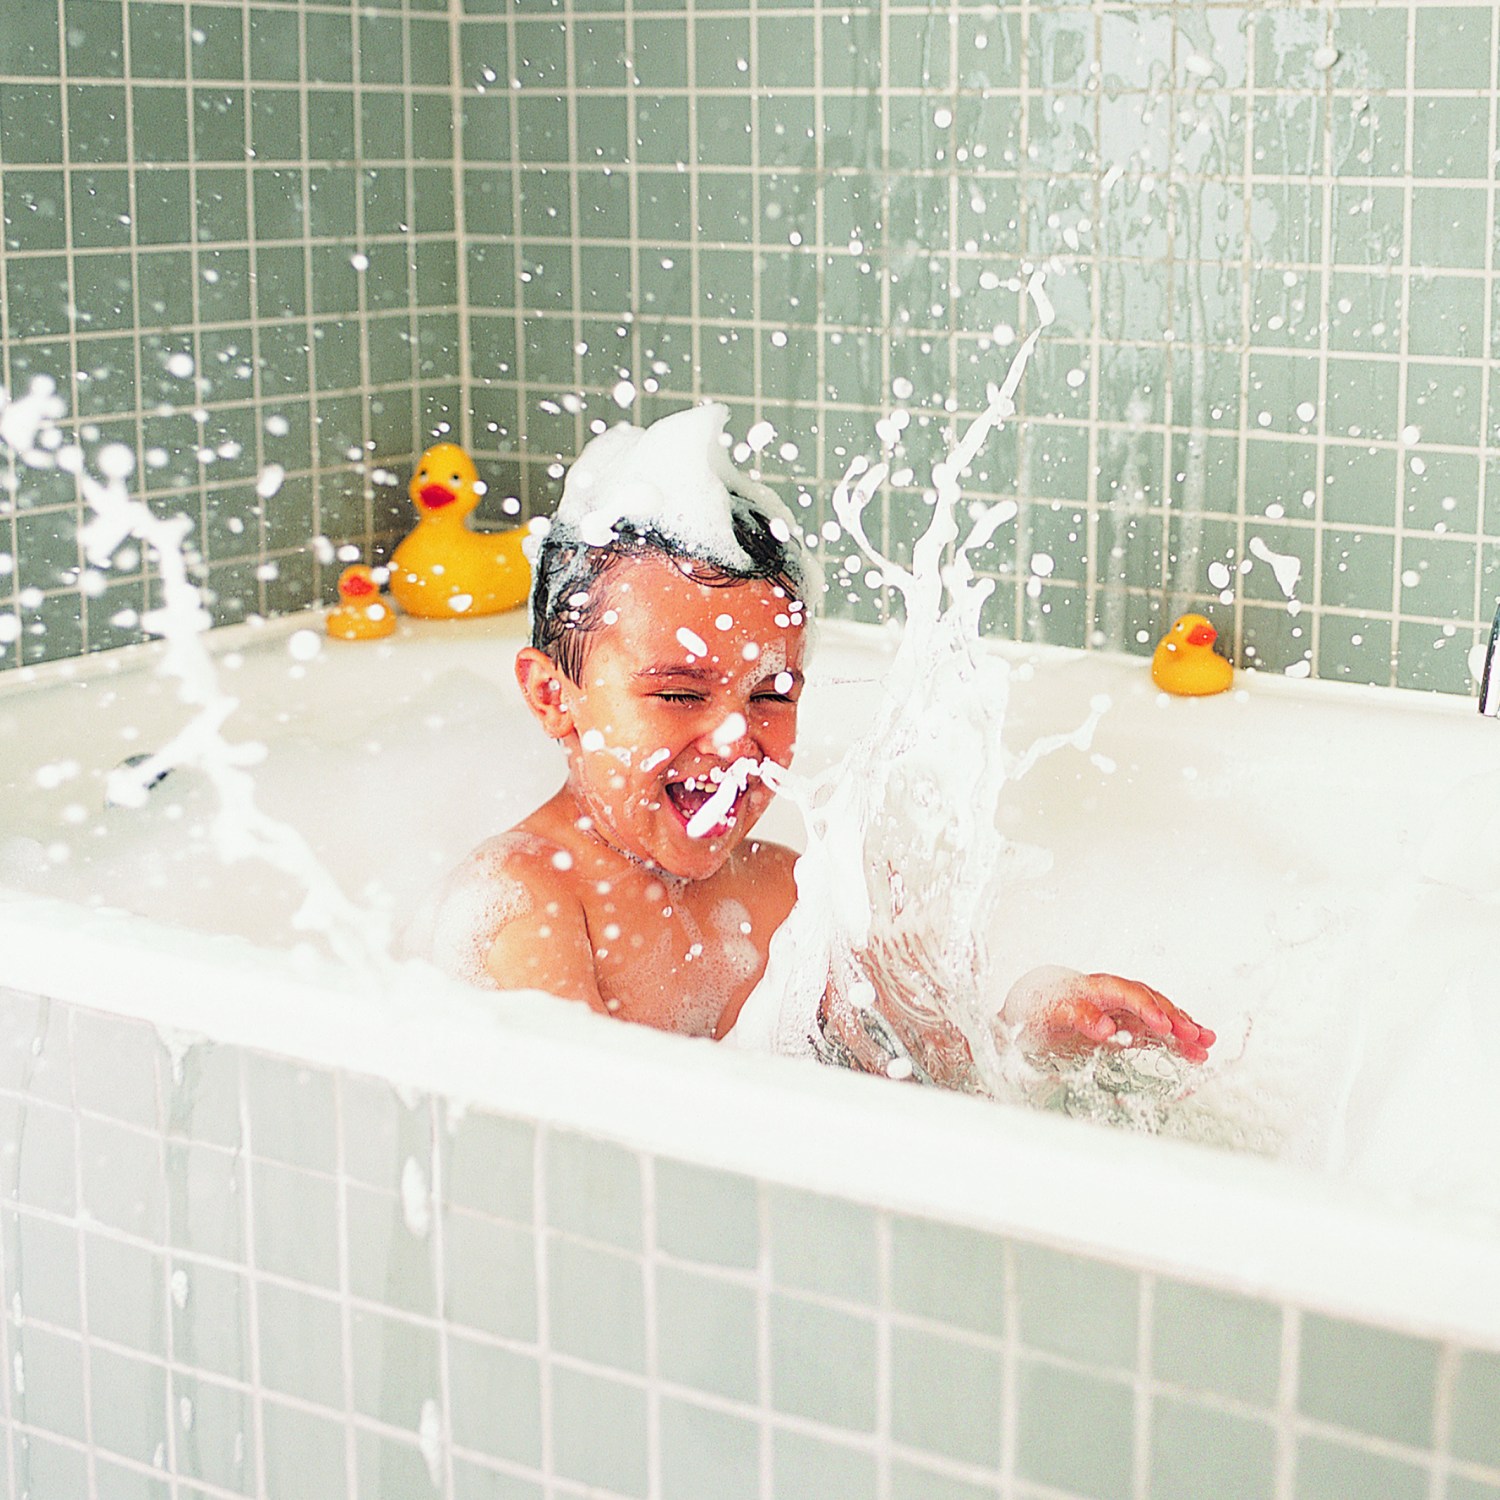 A young boy in a bath tub surrounded with bubbles & ducks